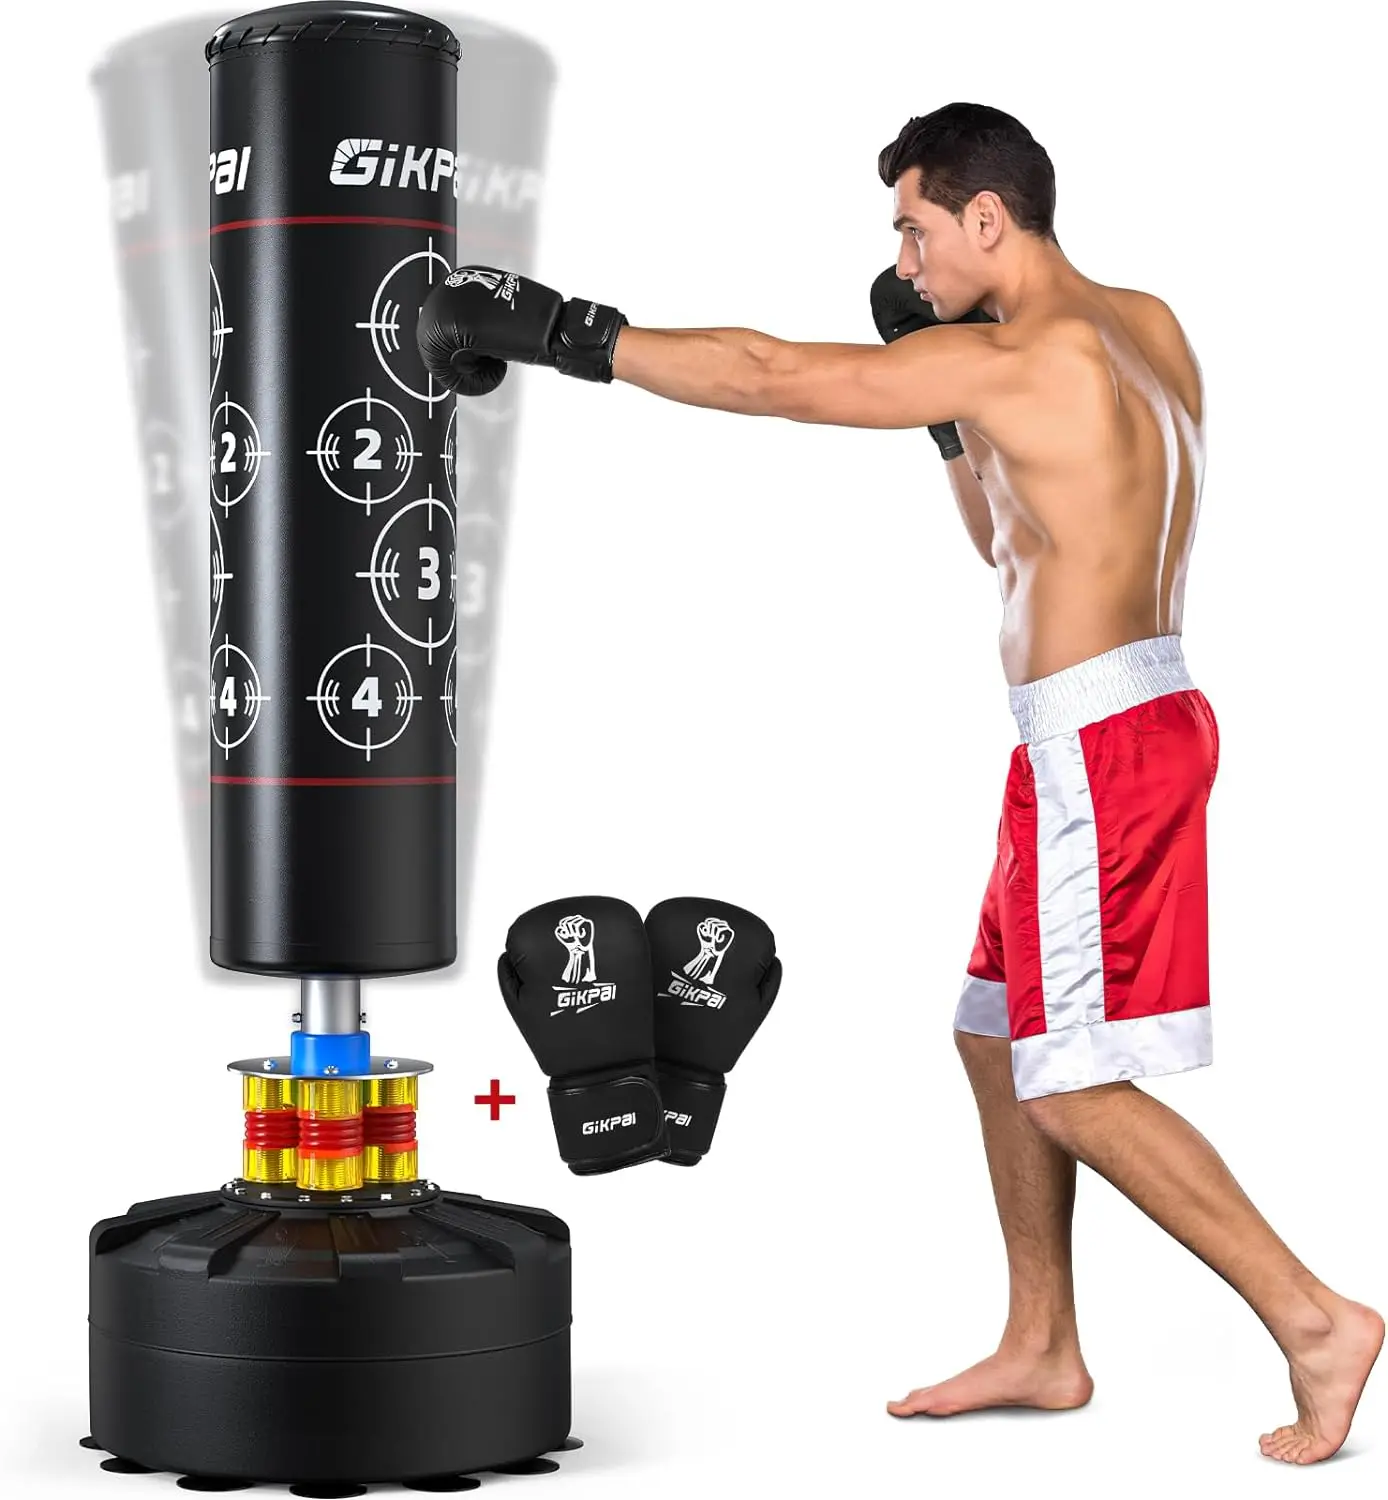 

GIKPAL Freestanding Punching Bag, Heavy Boxing Bag with Stand for Adult Teens Kids, Kickboxing Bag with Suction Cup Base for MMA